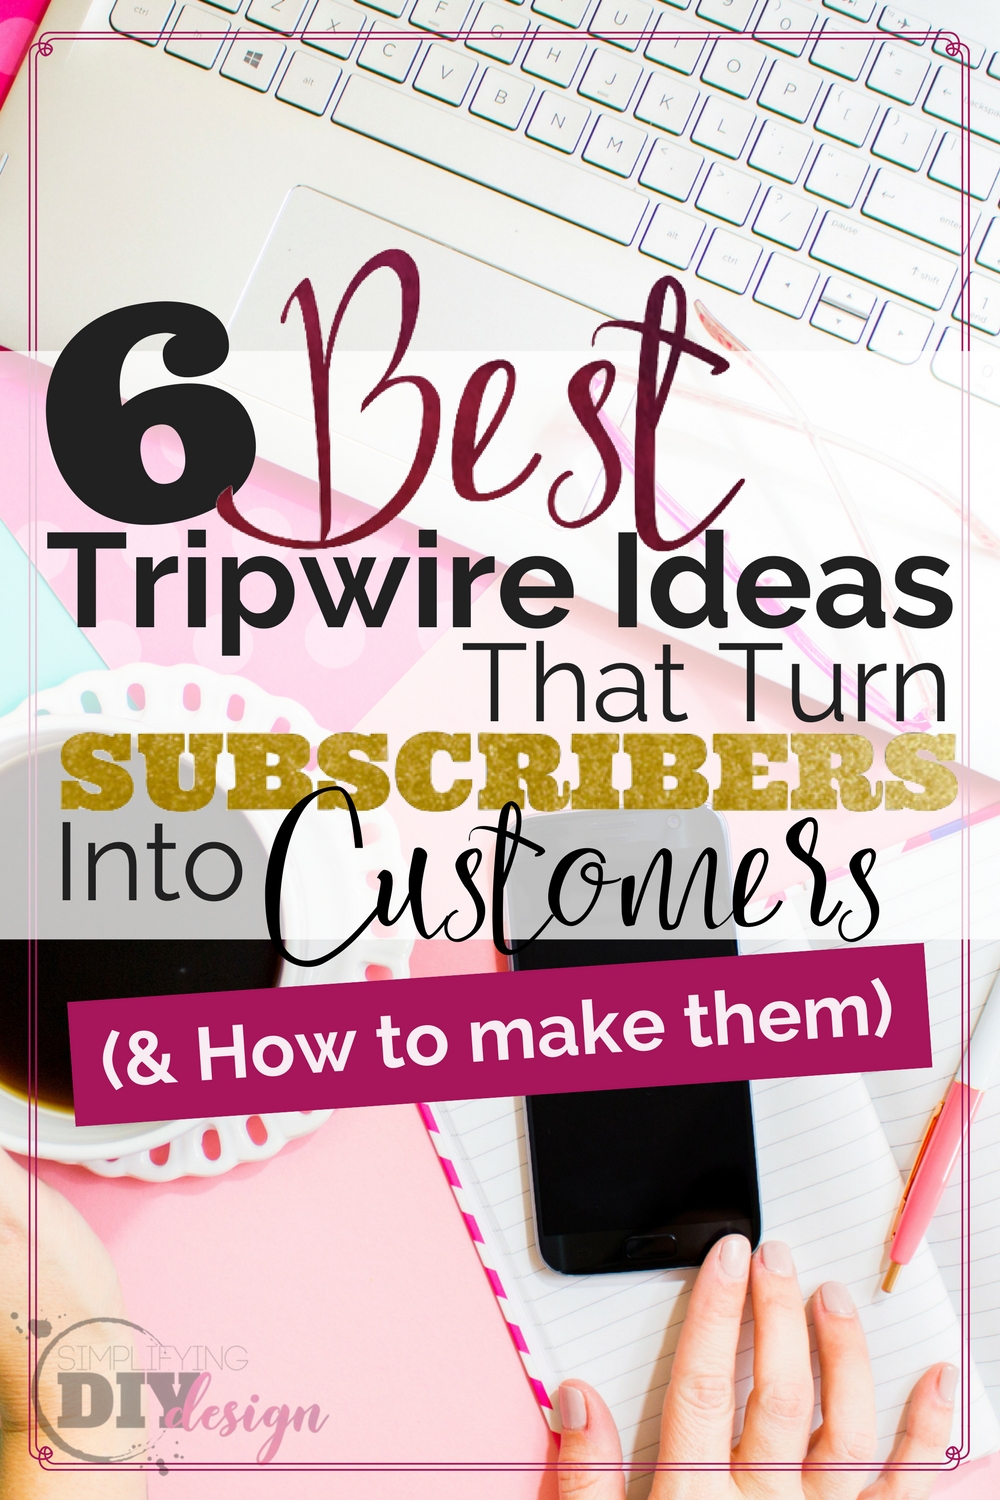 When it comes to the marketing part of my business, I struggled with how to make an income. I had my opt-in lead magnets but needed a way to turn subscribers into customer. Then I found tripwires. This this of tripwire ideas was exactly what I needed and I love the video tutorials included the post-- super helpful!